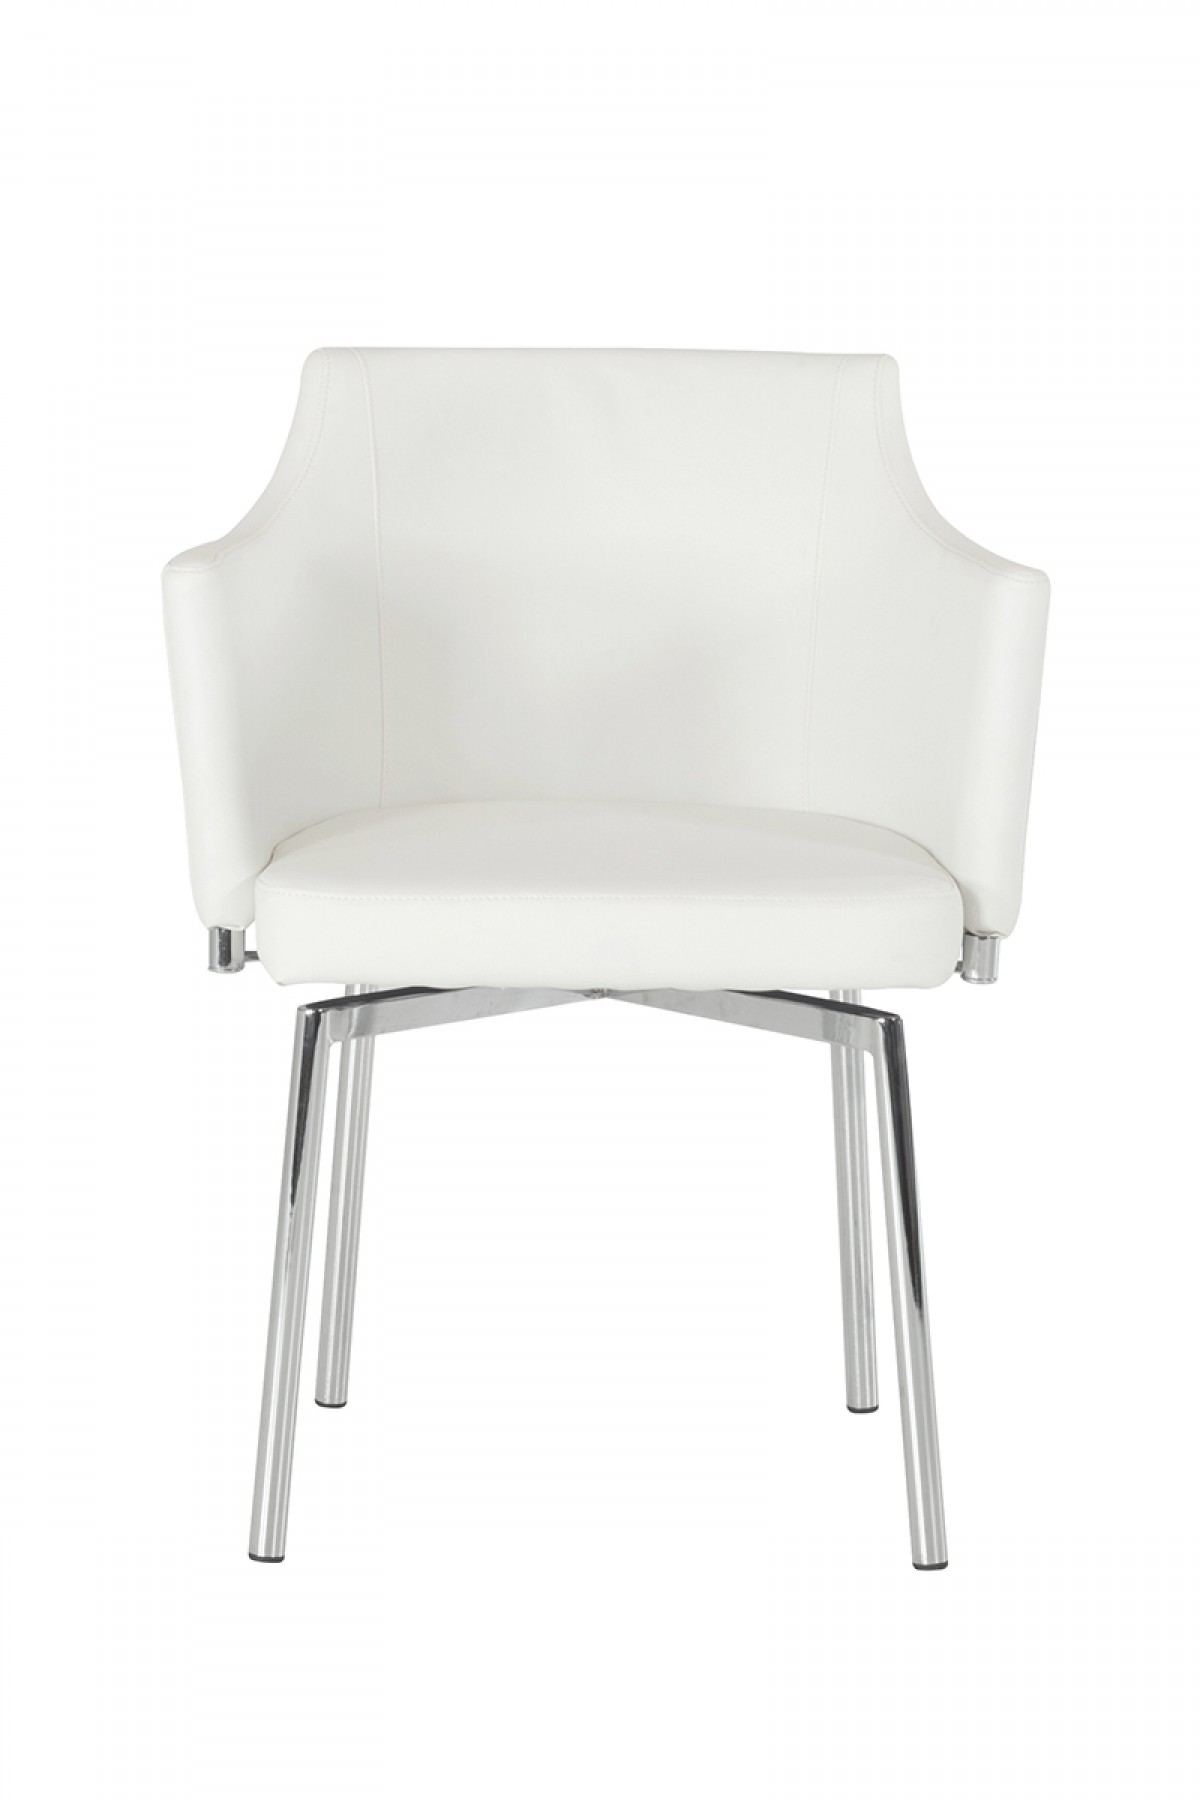 check out the brand new white leatherette dining chair available at advanced interior designs